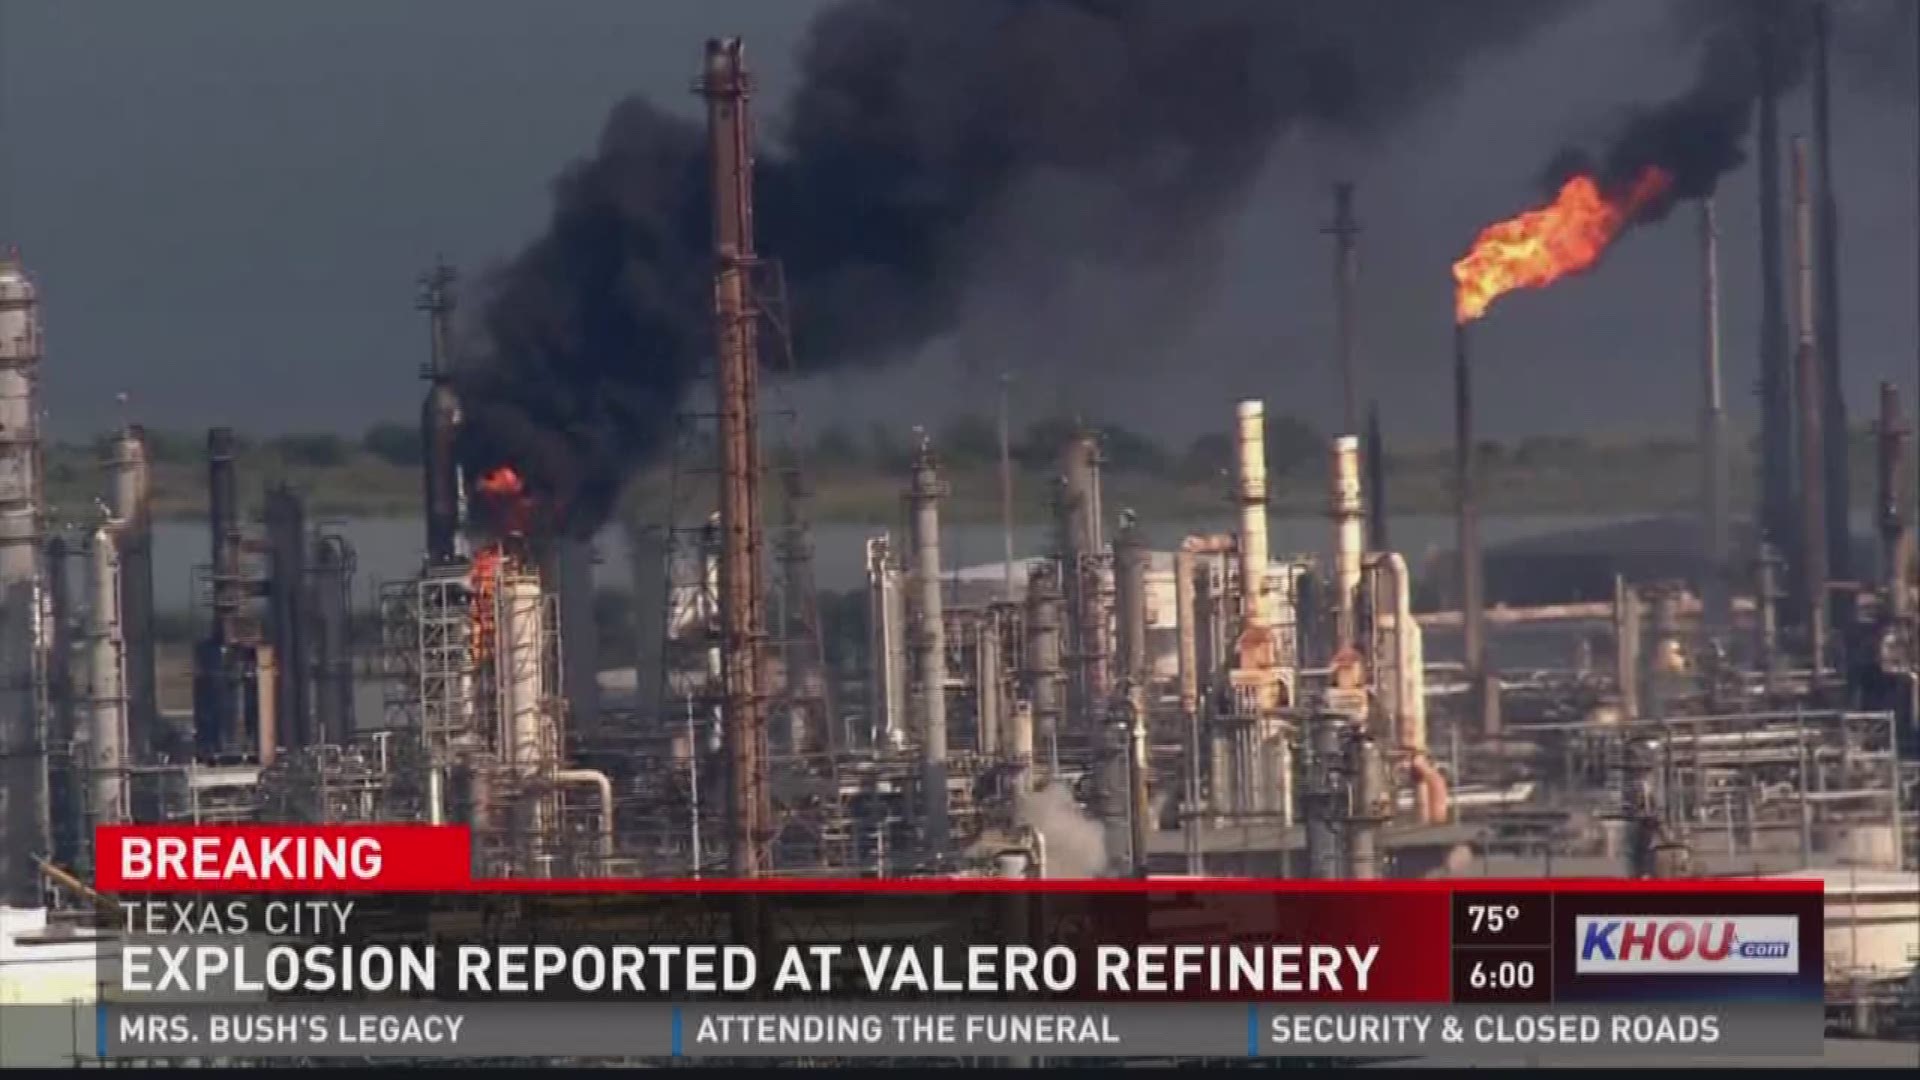 The Valero plant where an explosion occurred Thursday has a history of work safety issues, according to the Occupational Safety and Health Administration.